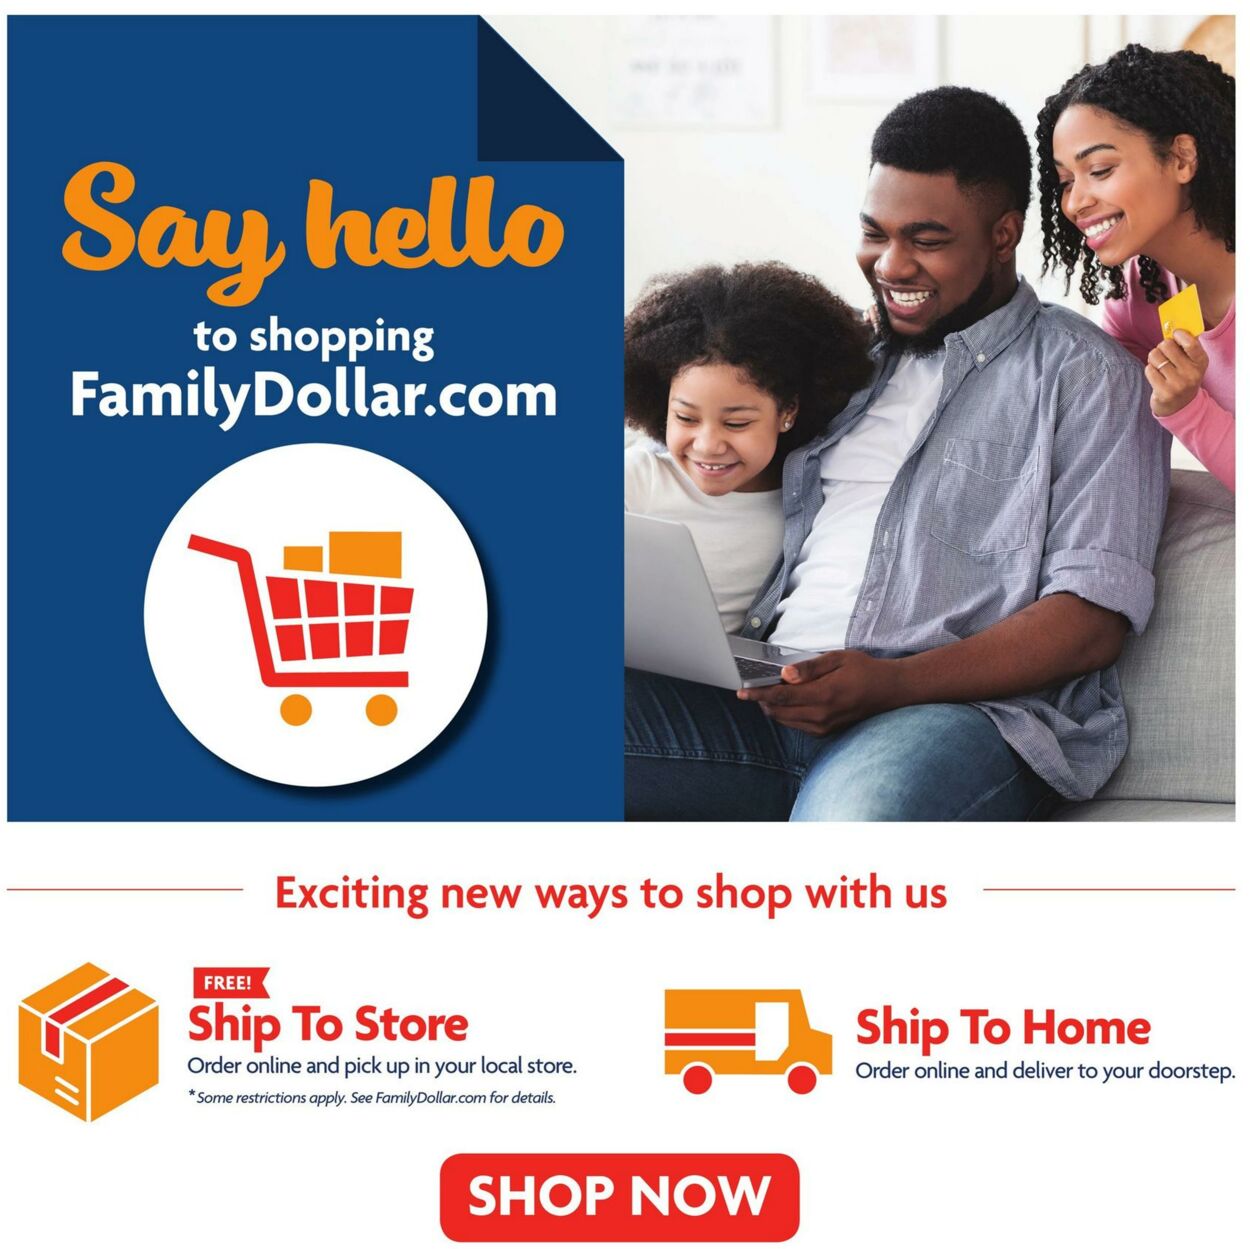 Family Dollar Ad from 03/10/2024